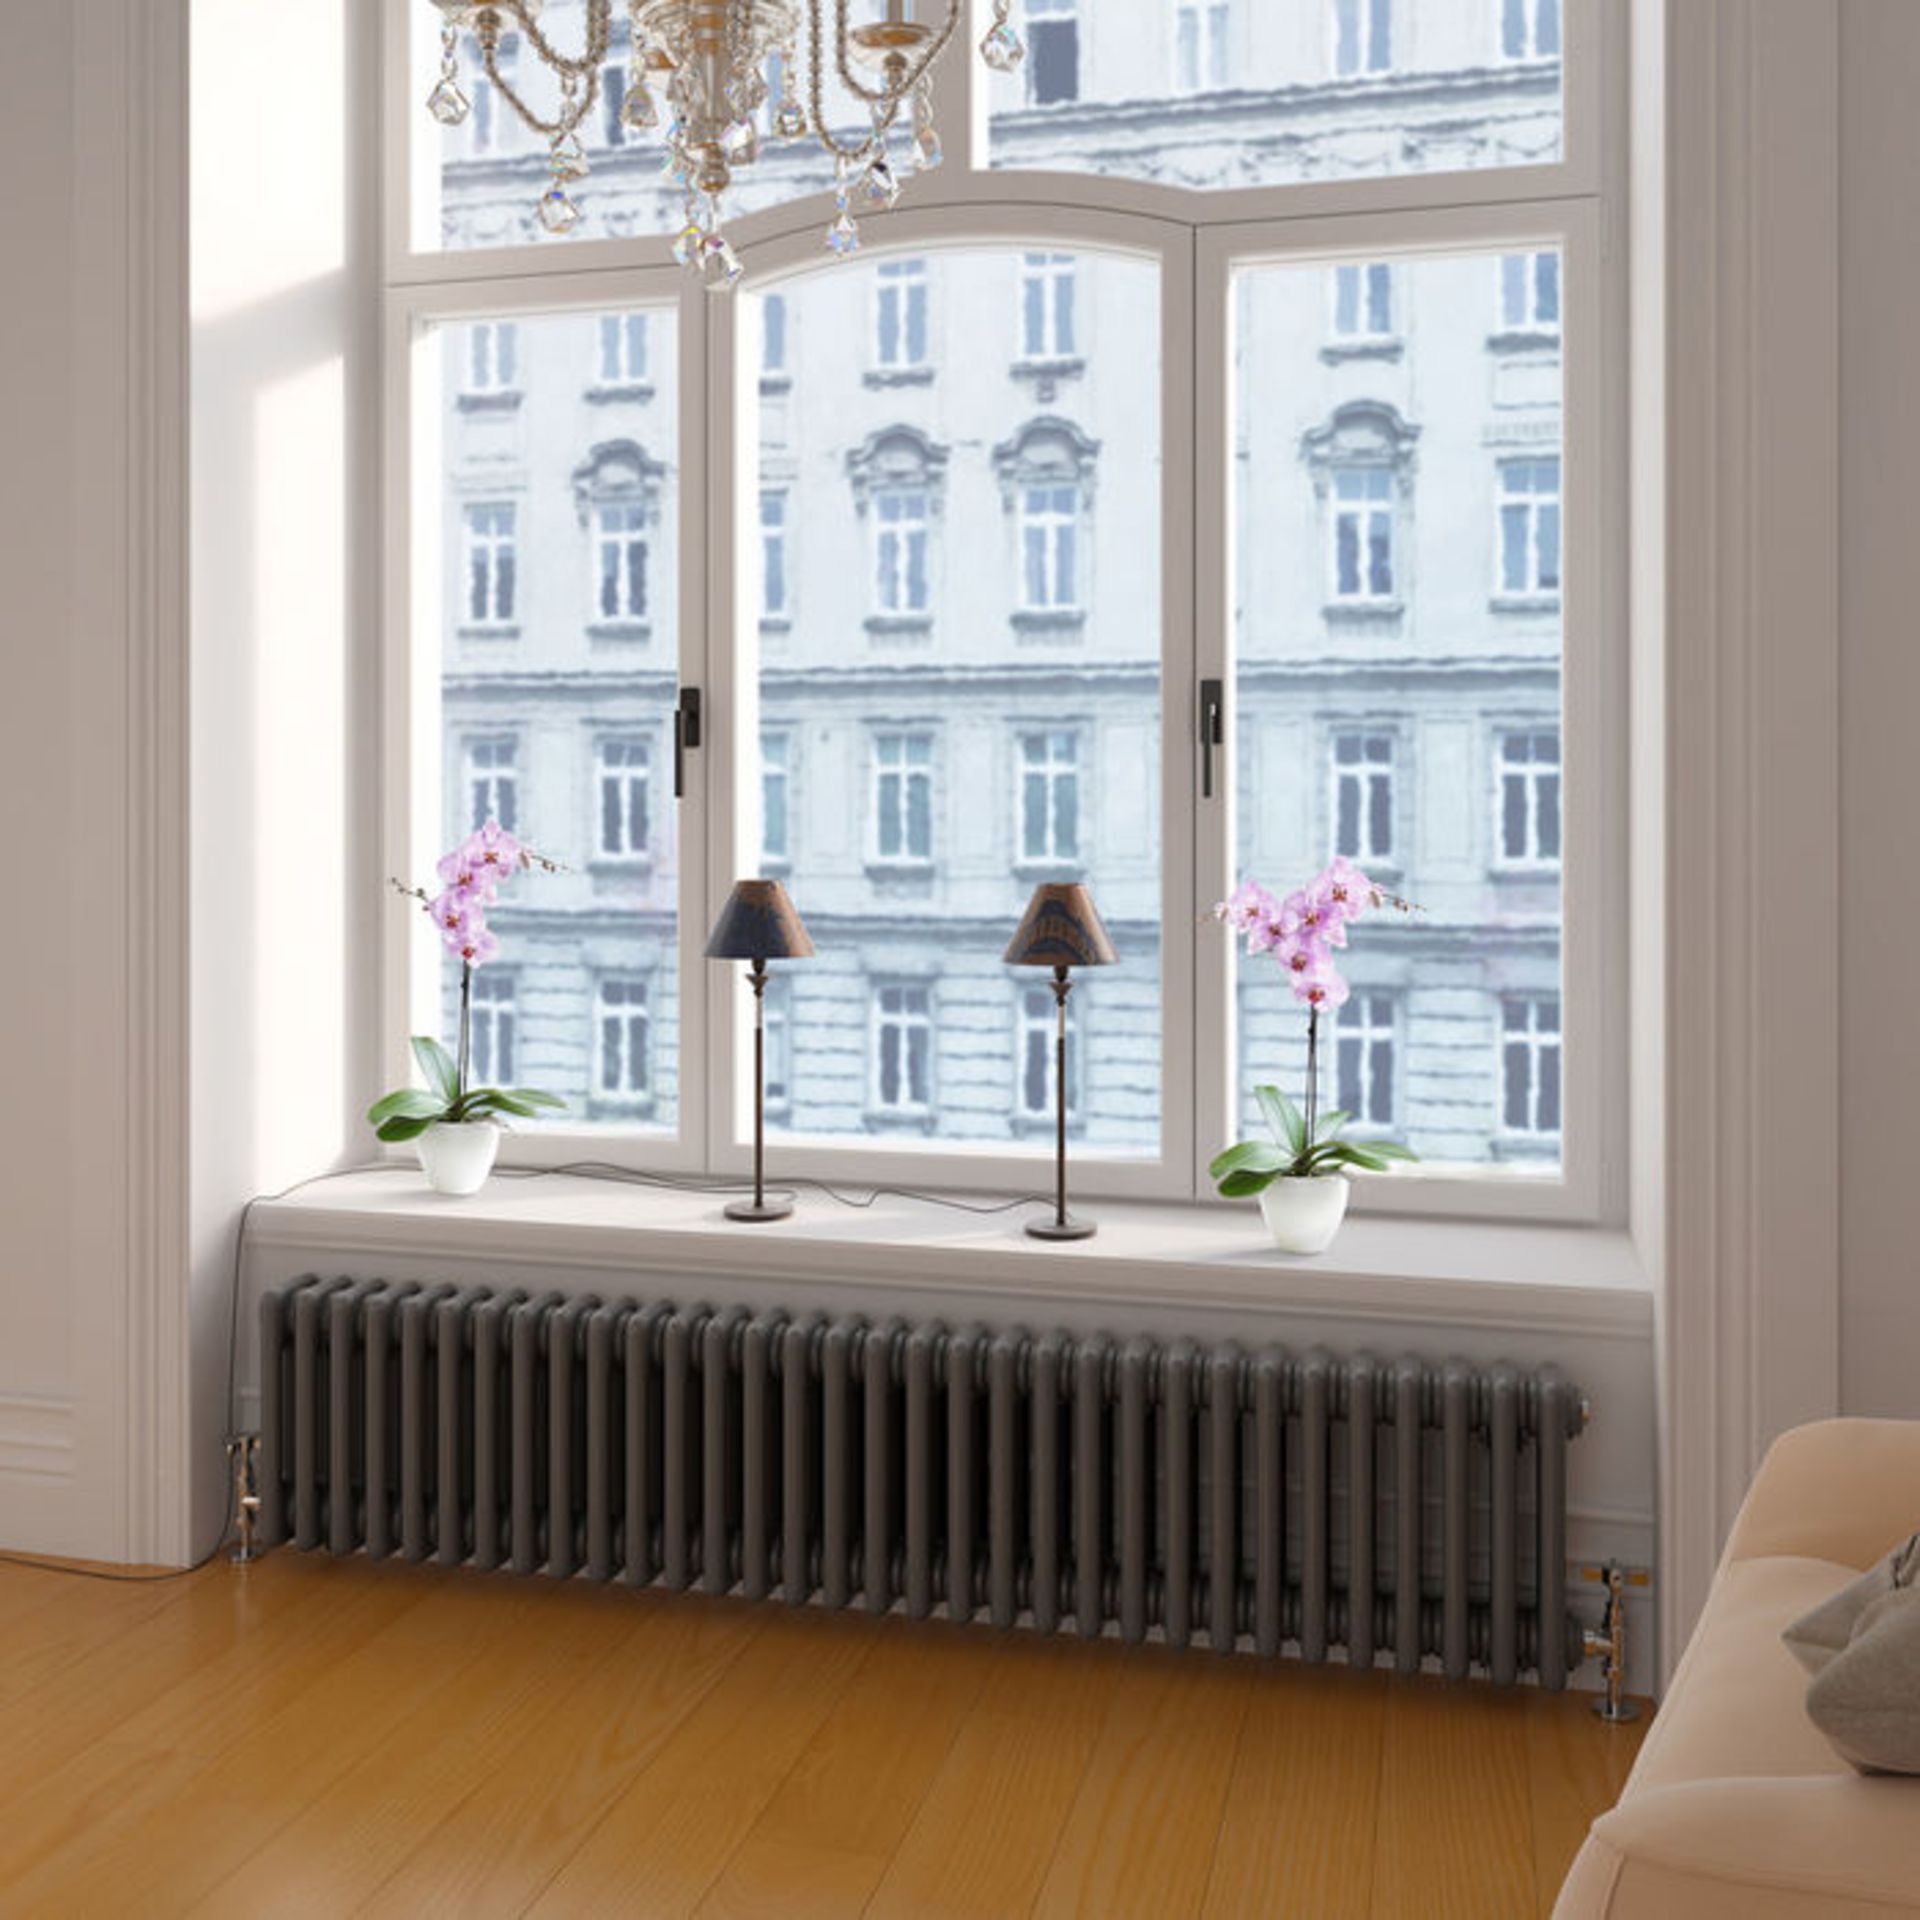 (W107) 300x1458mm Anthracite Triple Panel Horizontal Colosseum Traditional Radiator. RRP £649.99. - Image 3 of 5